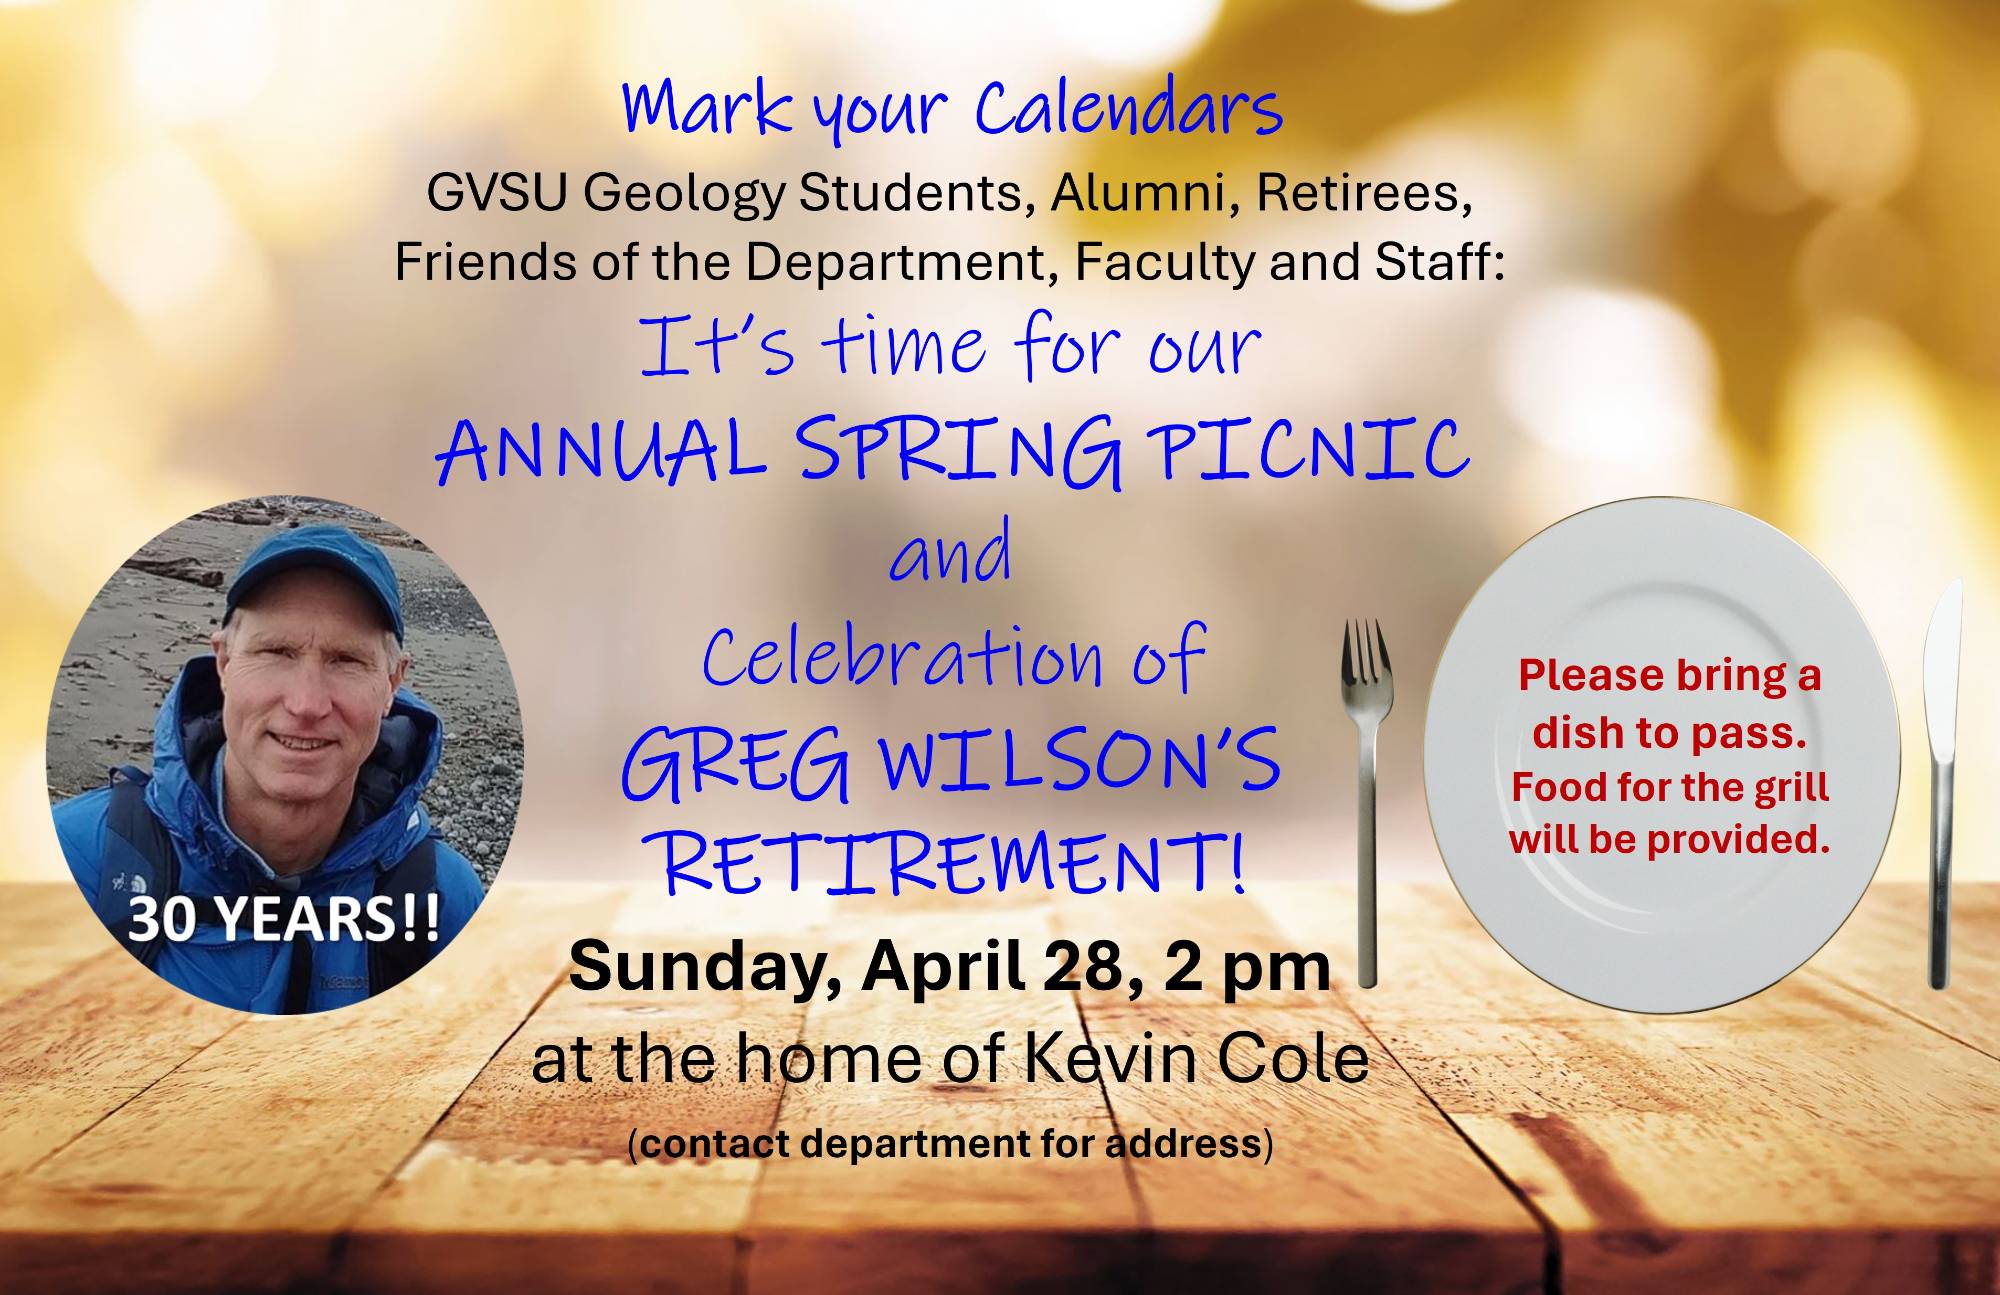 Invitation to department picnic and Greg Wilson retirement party